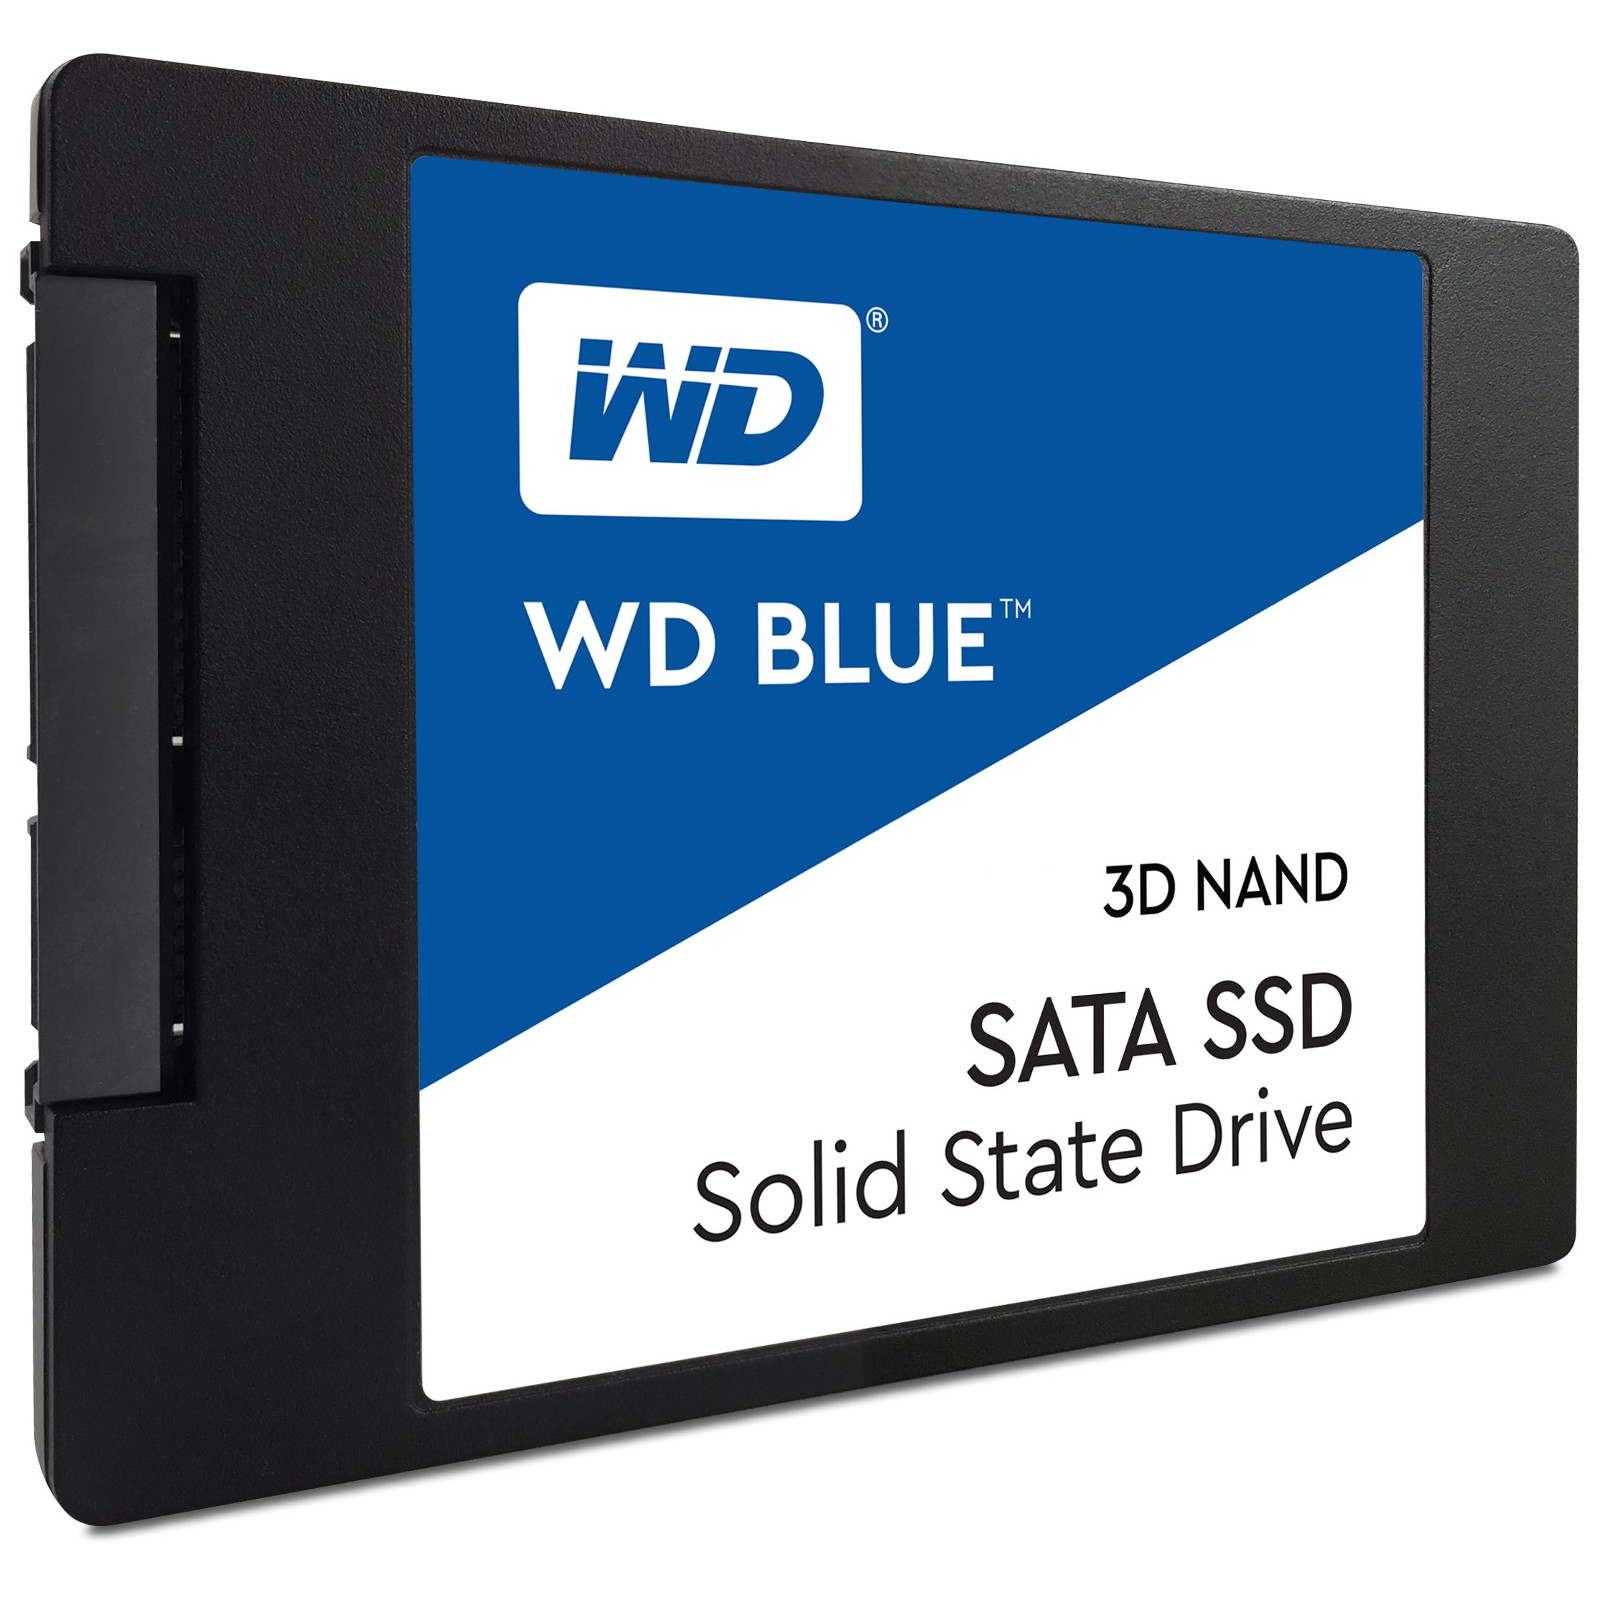 WD - WD Blue 500GB 3D NAND SSD 2.5 SATA 6Gbps Solid State Drive (WDS500G2B0A)